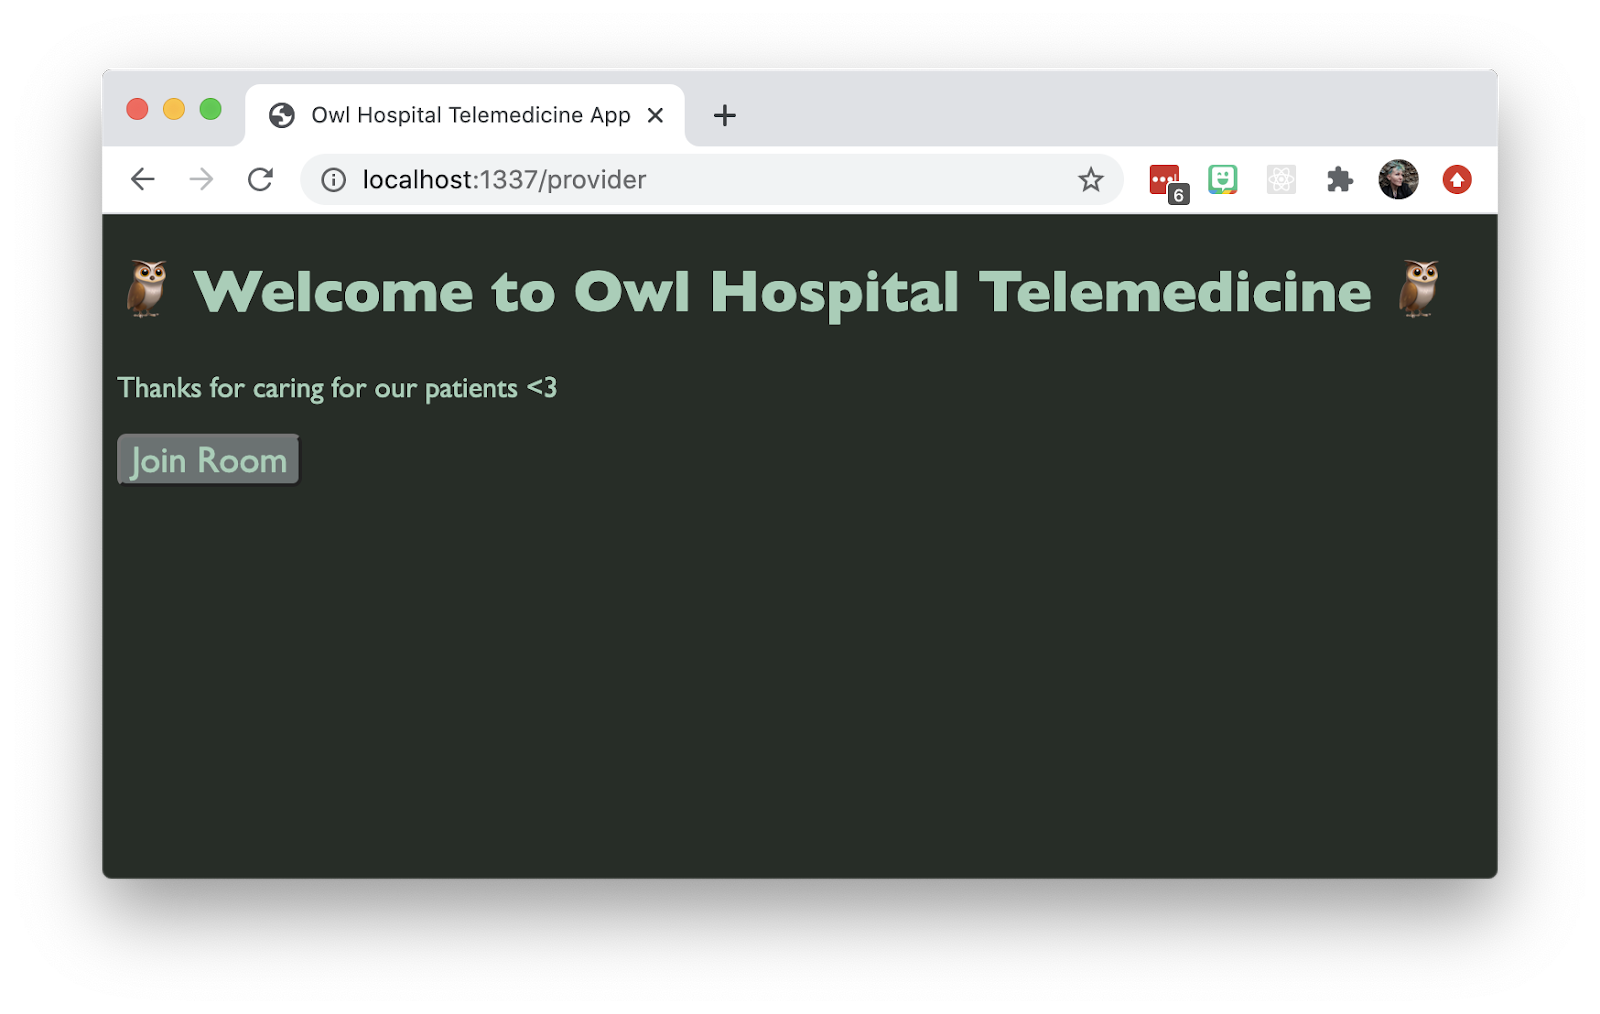 Screenshot of a Twilio Video application. The big text says "Welcome to Owl Hospital Telemedicine." Small text says "Thanks for caring for our patients." There&#x27;s one button that says "Join Room." Also it&#x27;s got a green/woodsy color palette going on.